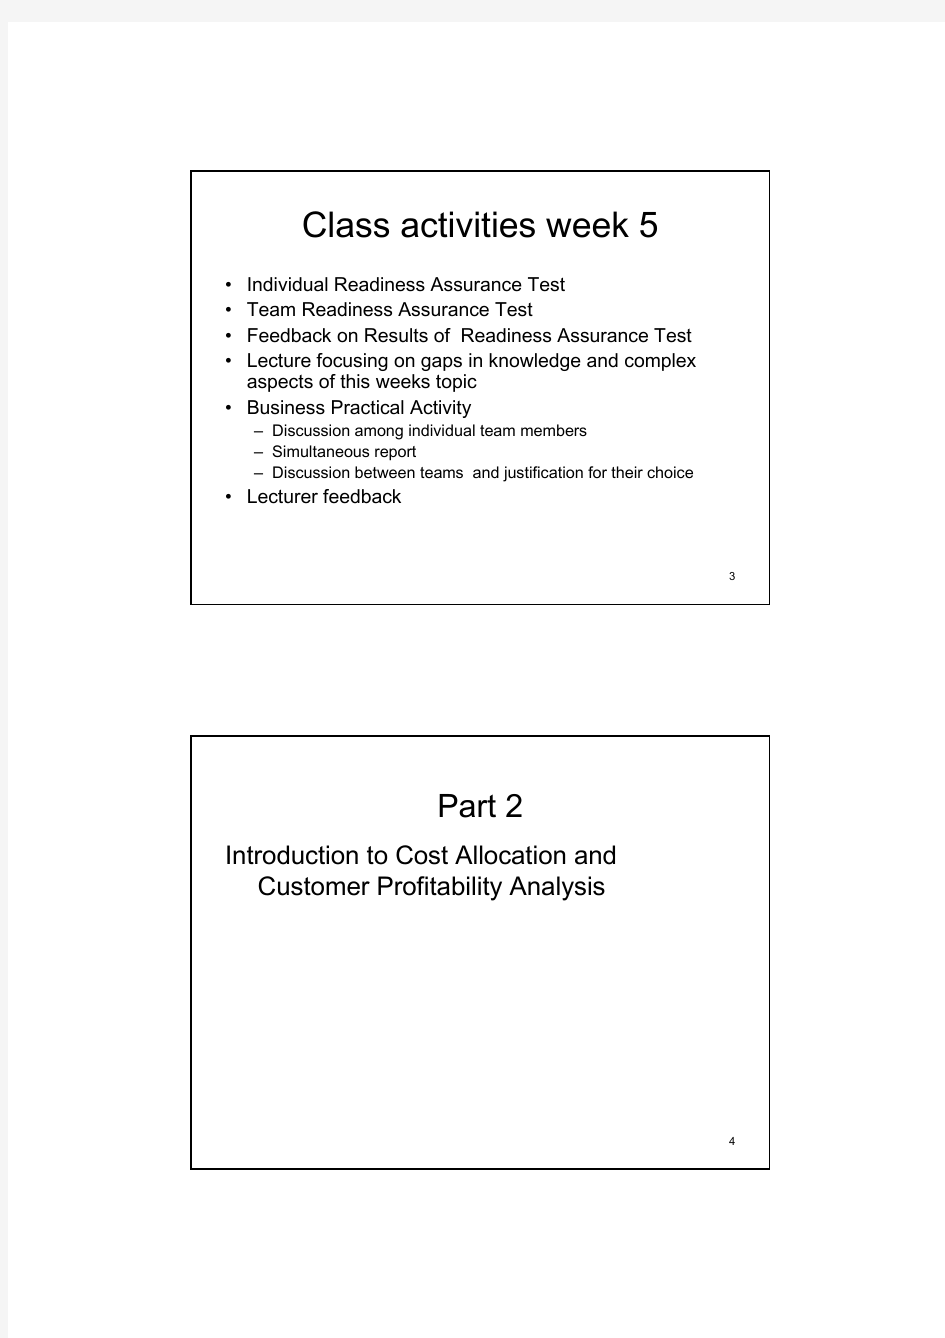 ACCT5002_Managerial Accounting and Decision Making_2009 Semester 2_2009 s2 ACCT5002 Week 5